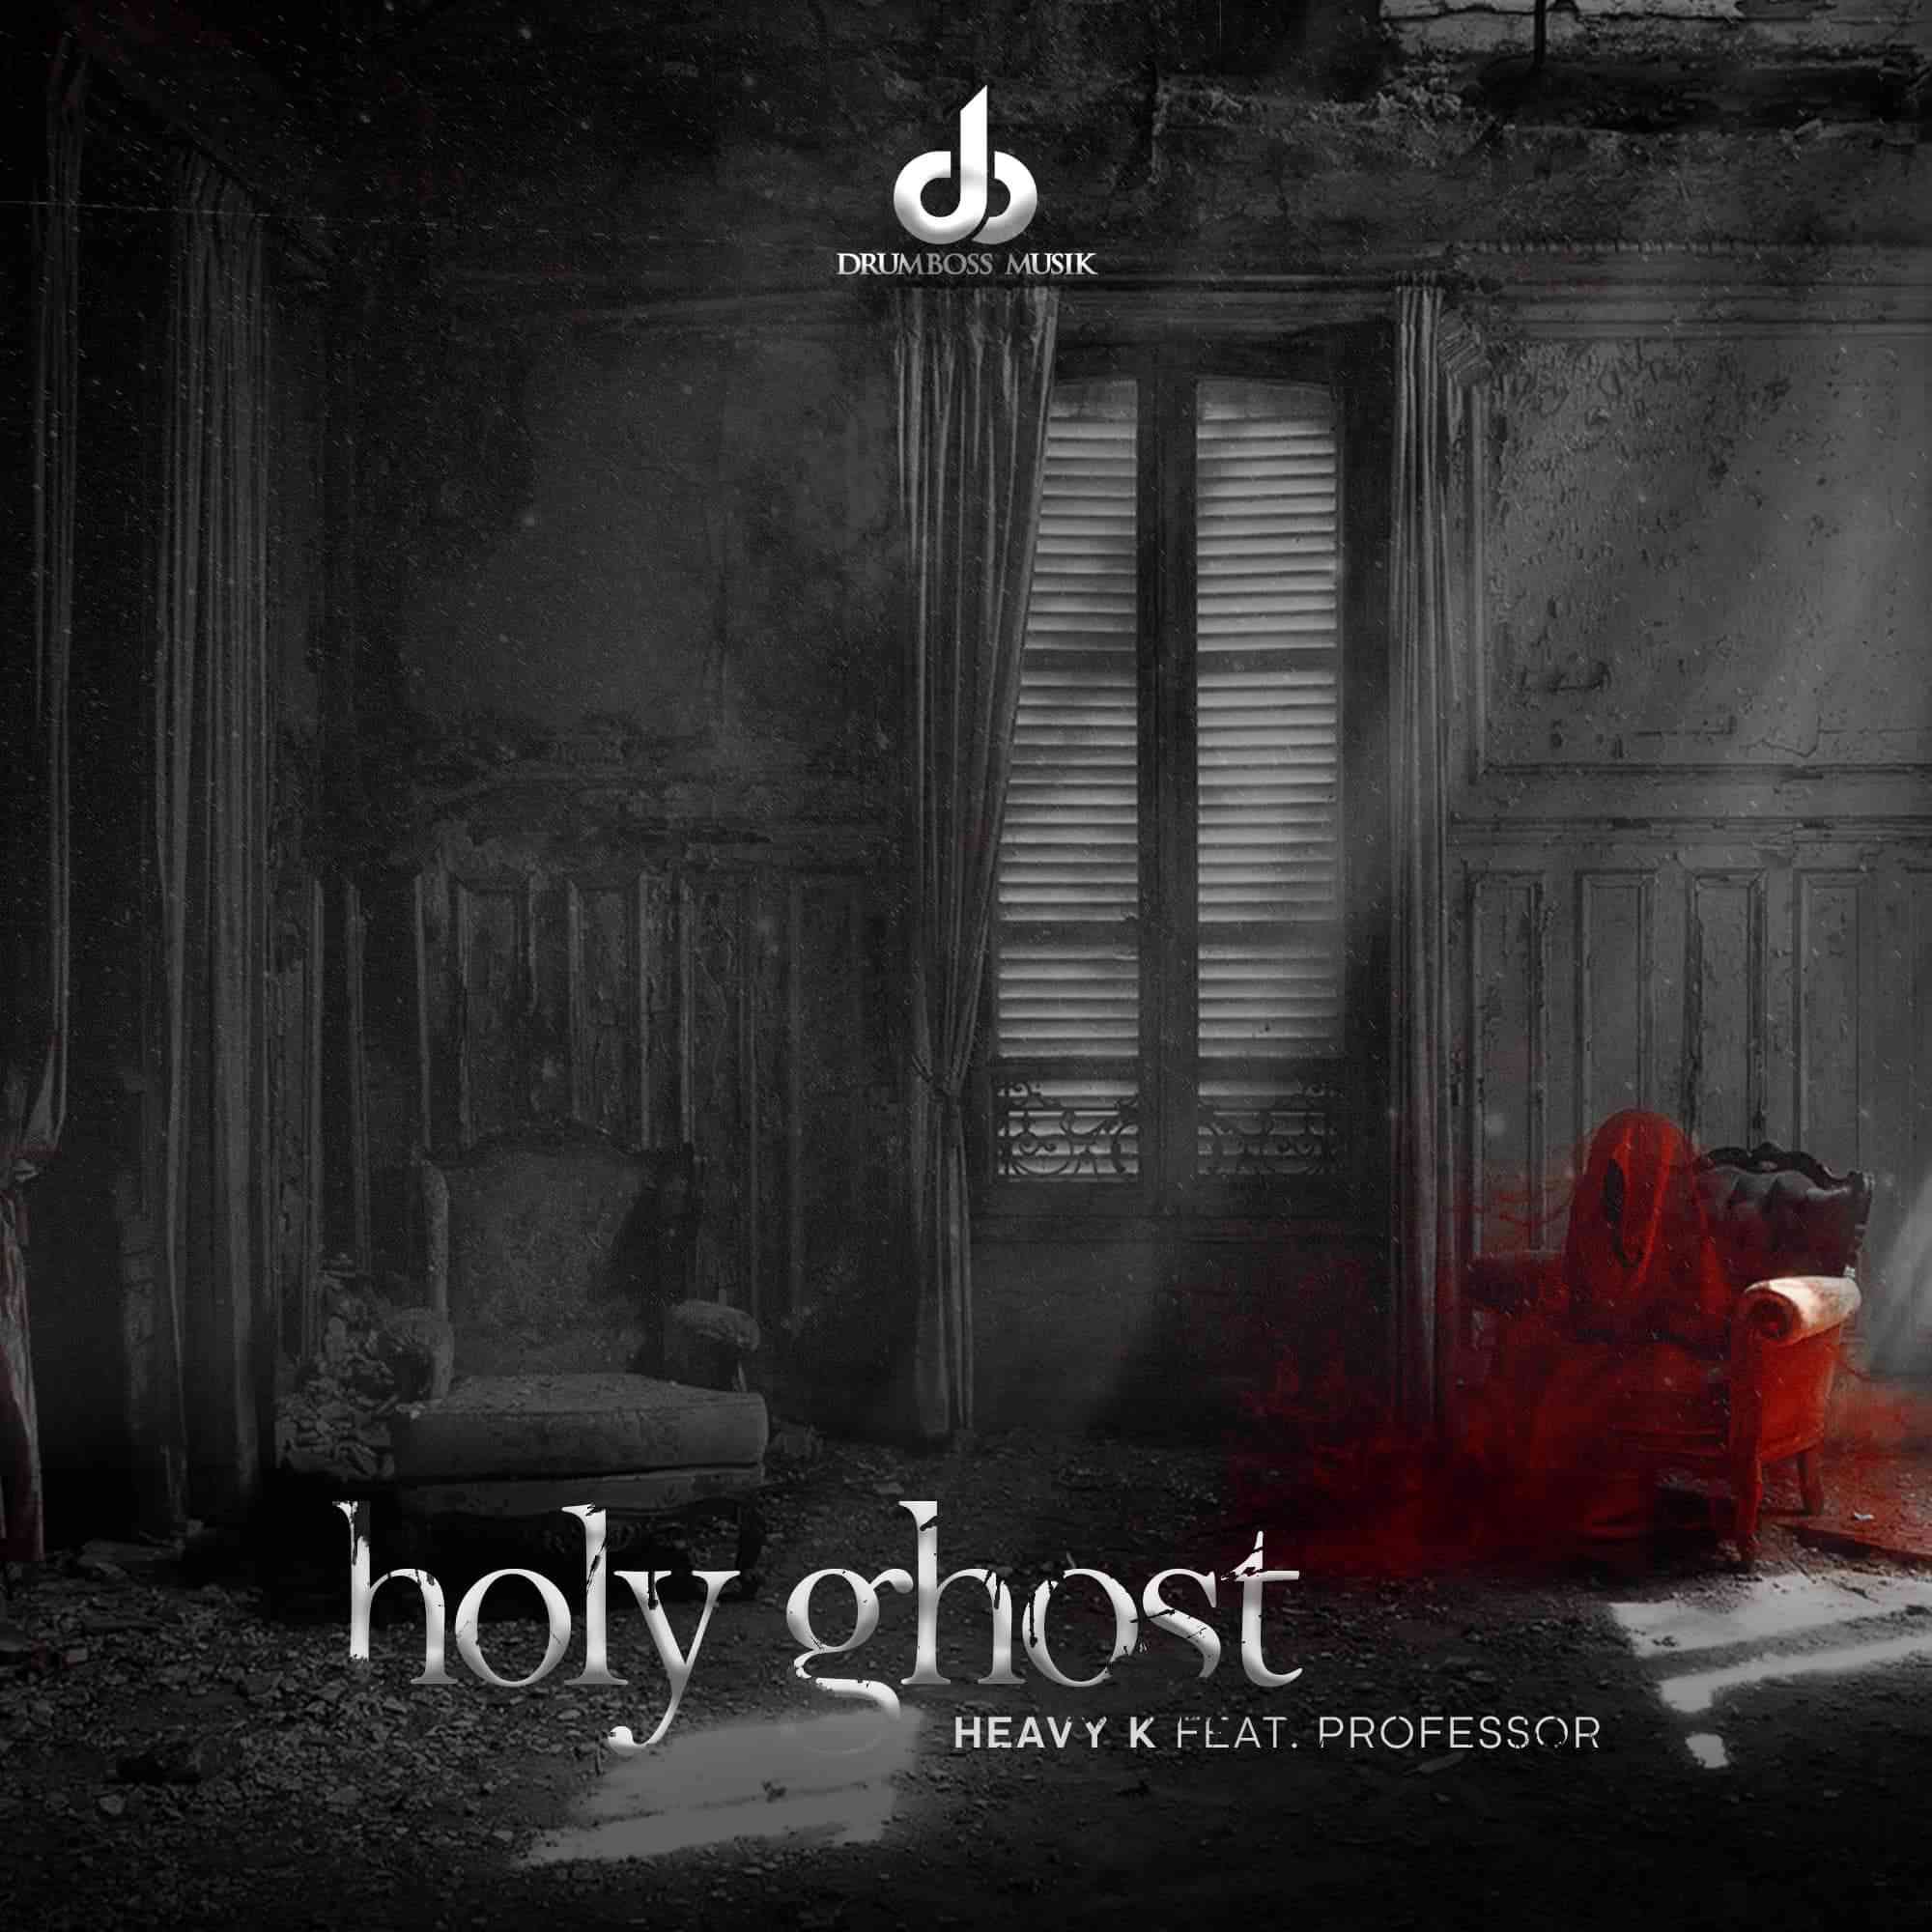 Heavy-K & Professor Deliver Holy Ghost